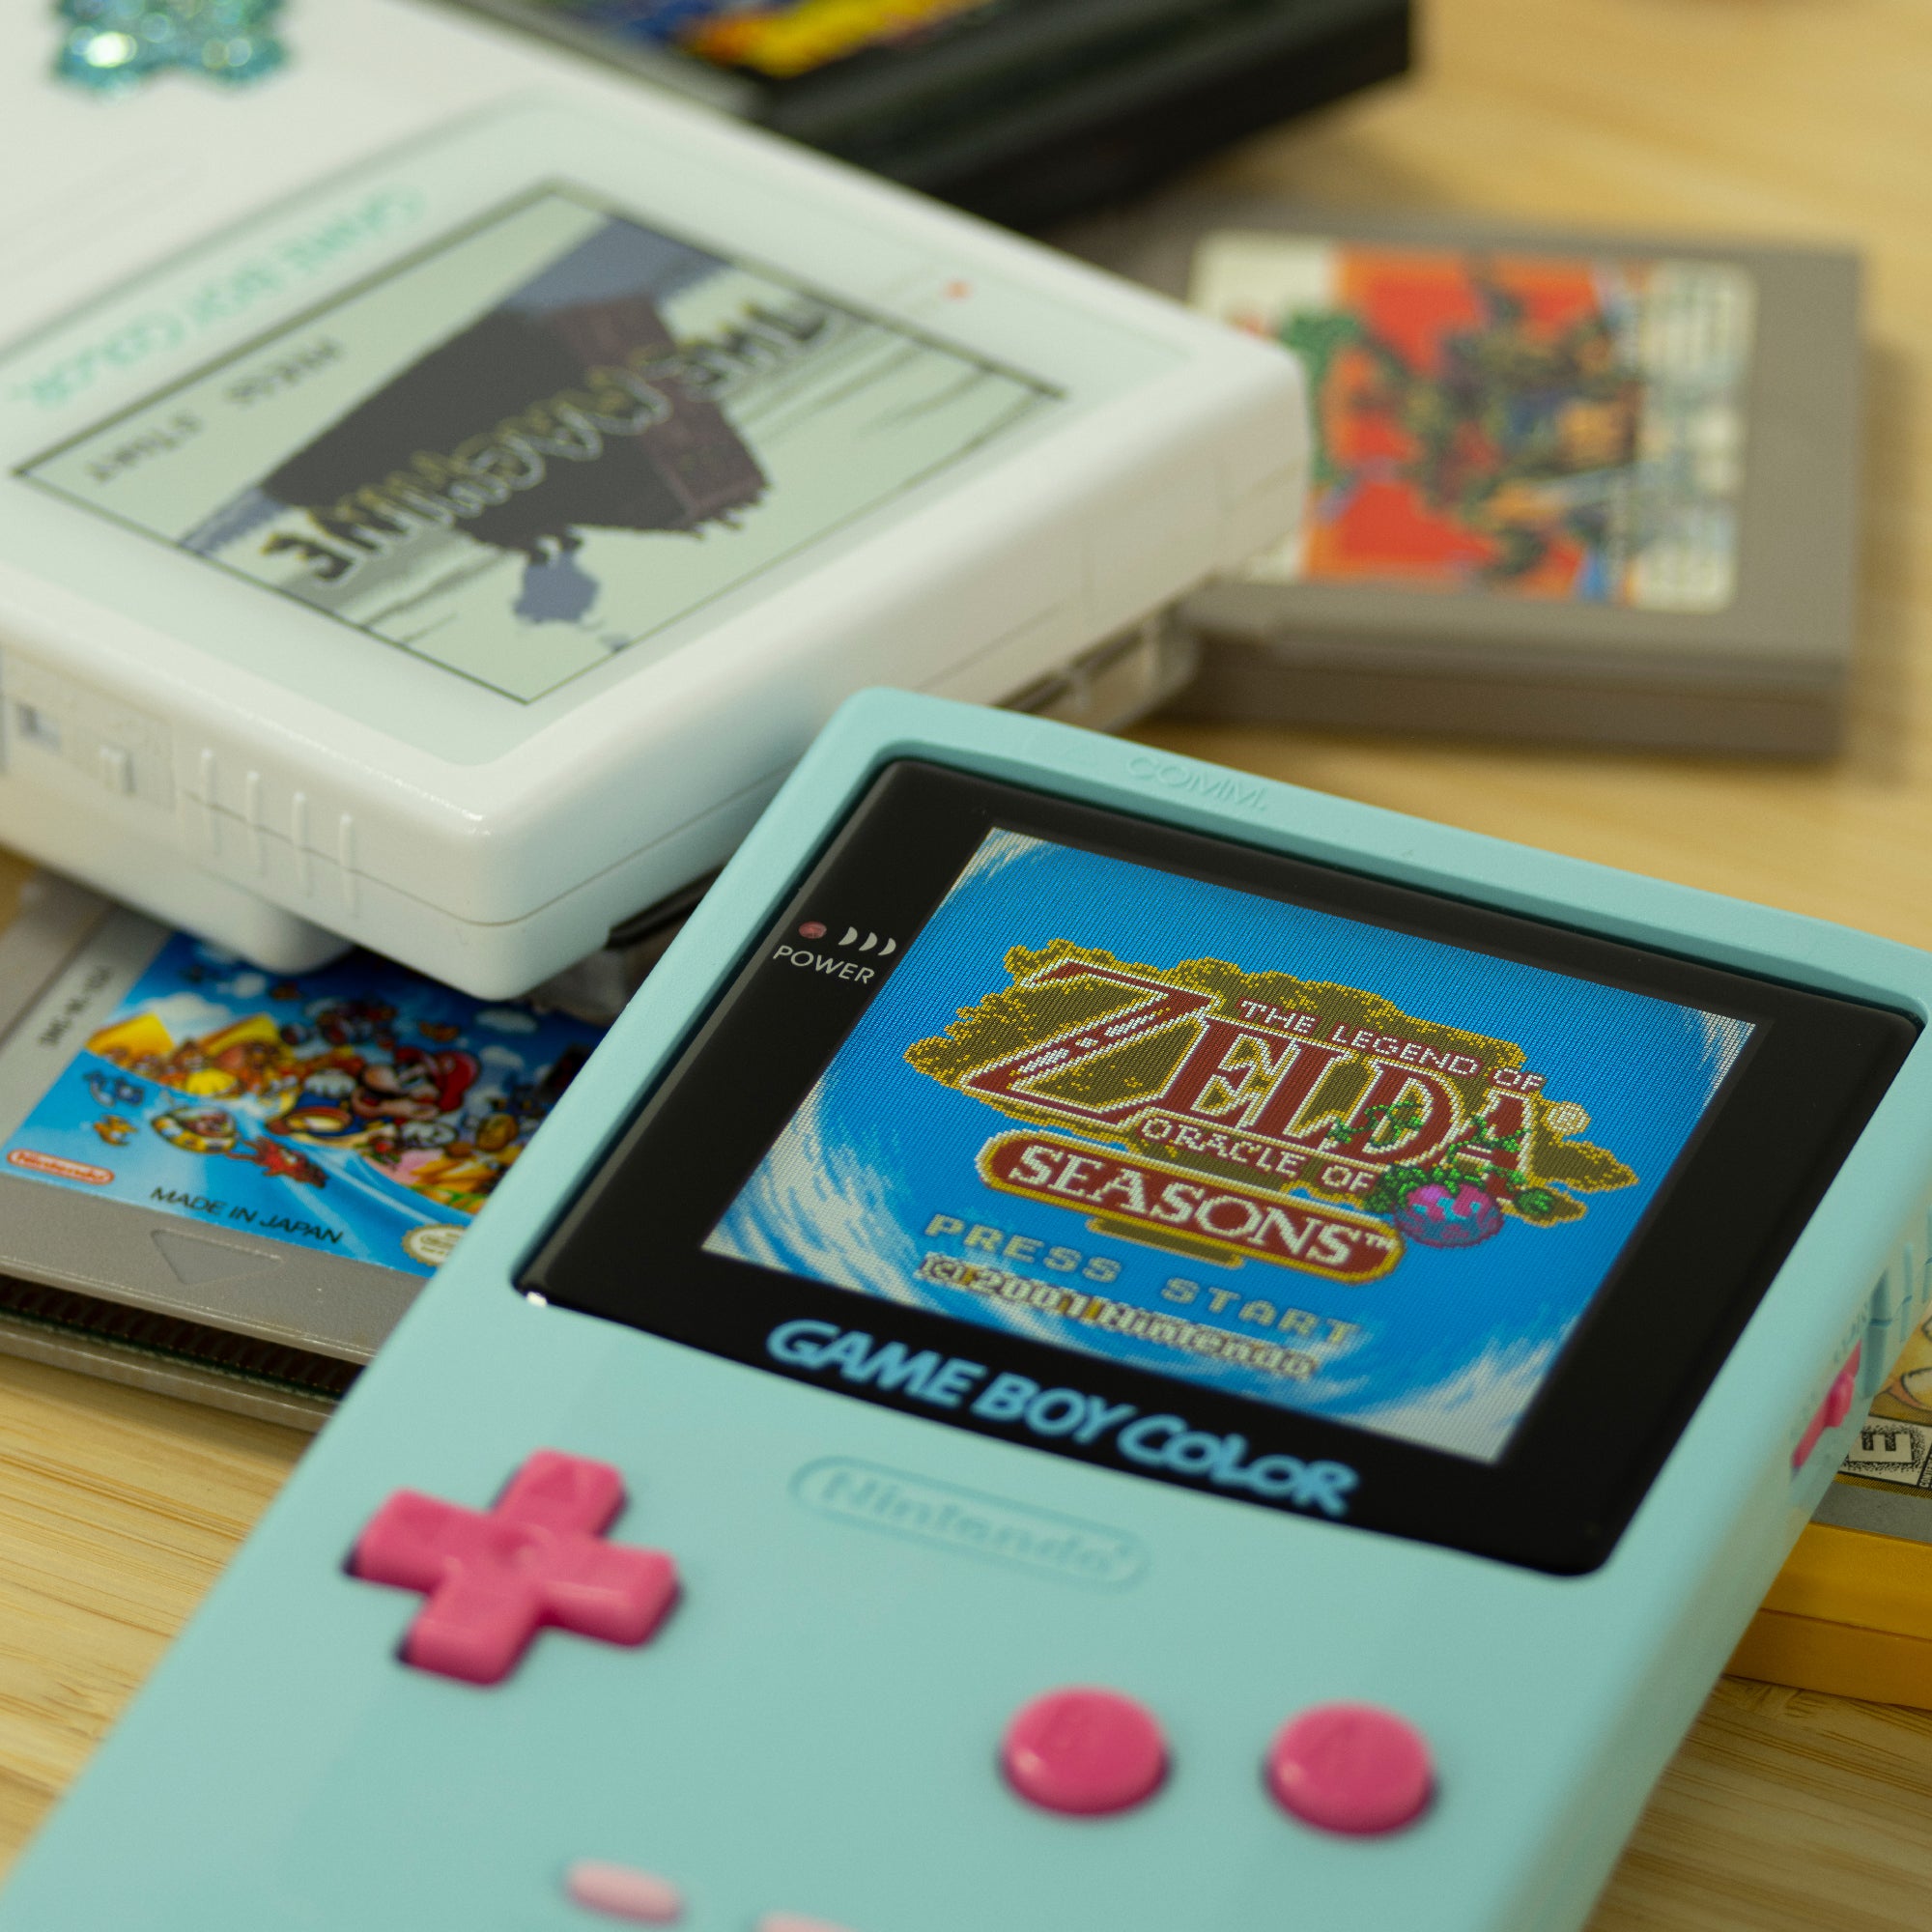 Play Retro Games Online - Play the old sega, nintendo and gameboy